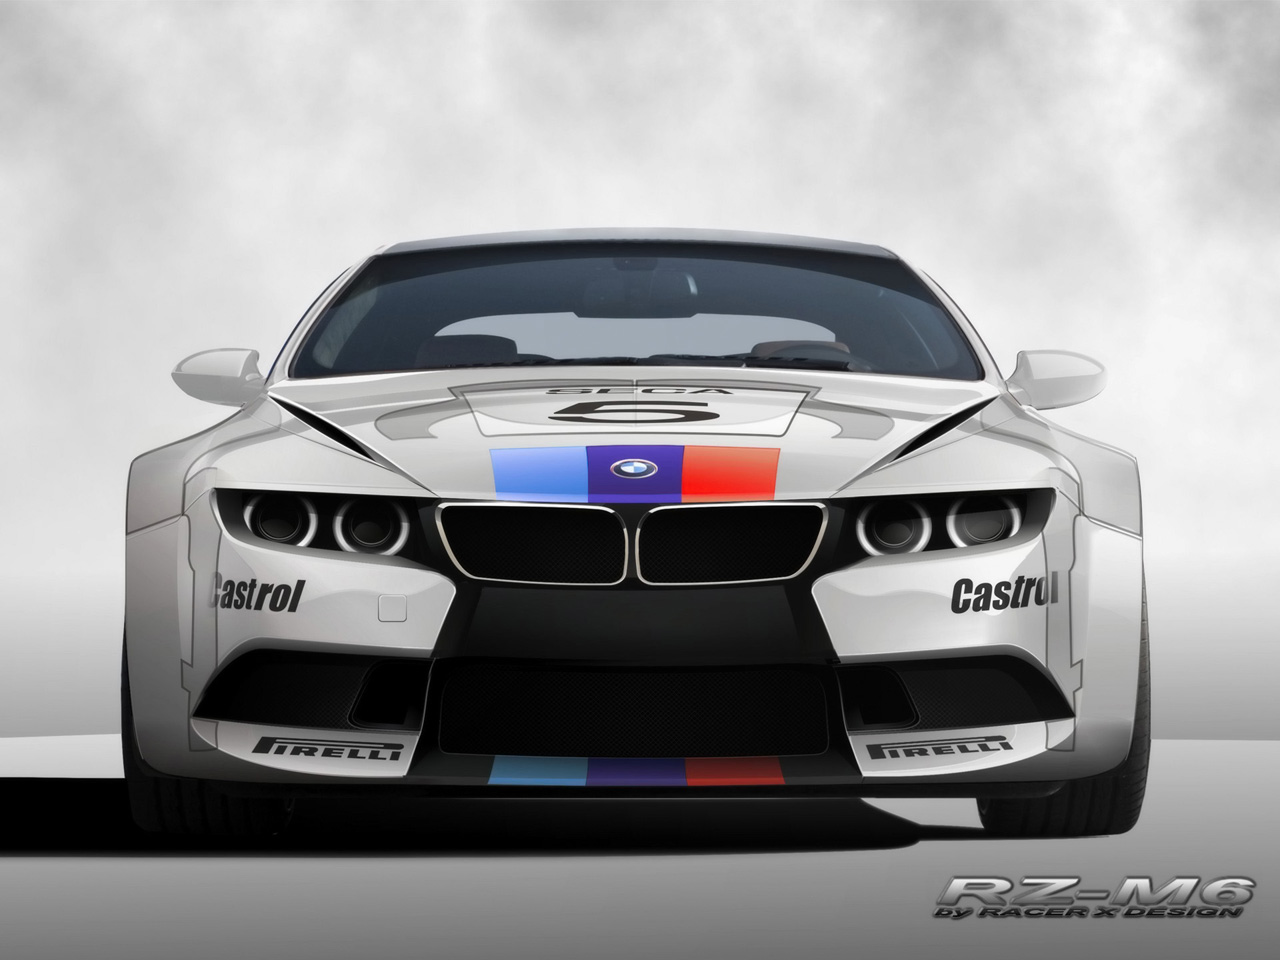 FREE HD PHOTO GALLERY BMW Cars HD Wallpapers 1